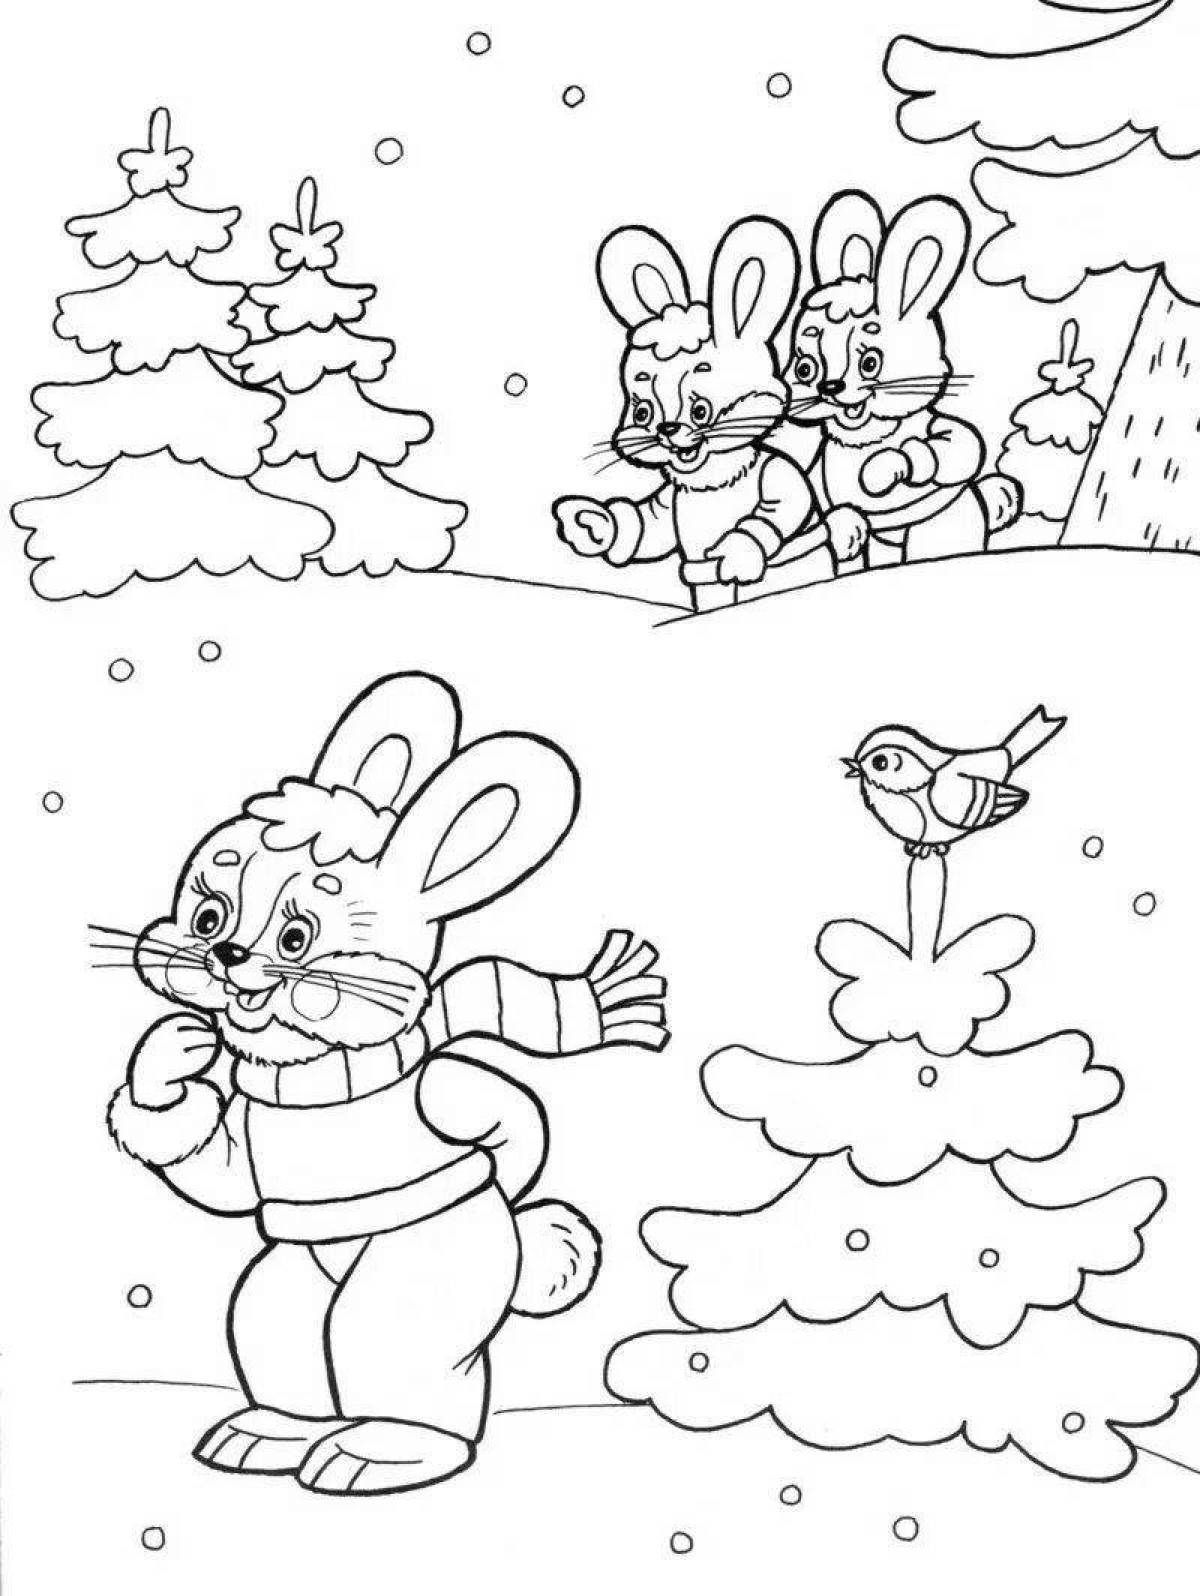 Adorable winter animal coloring pages